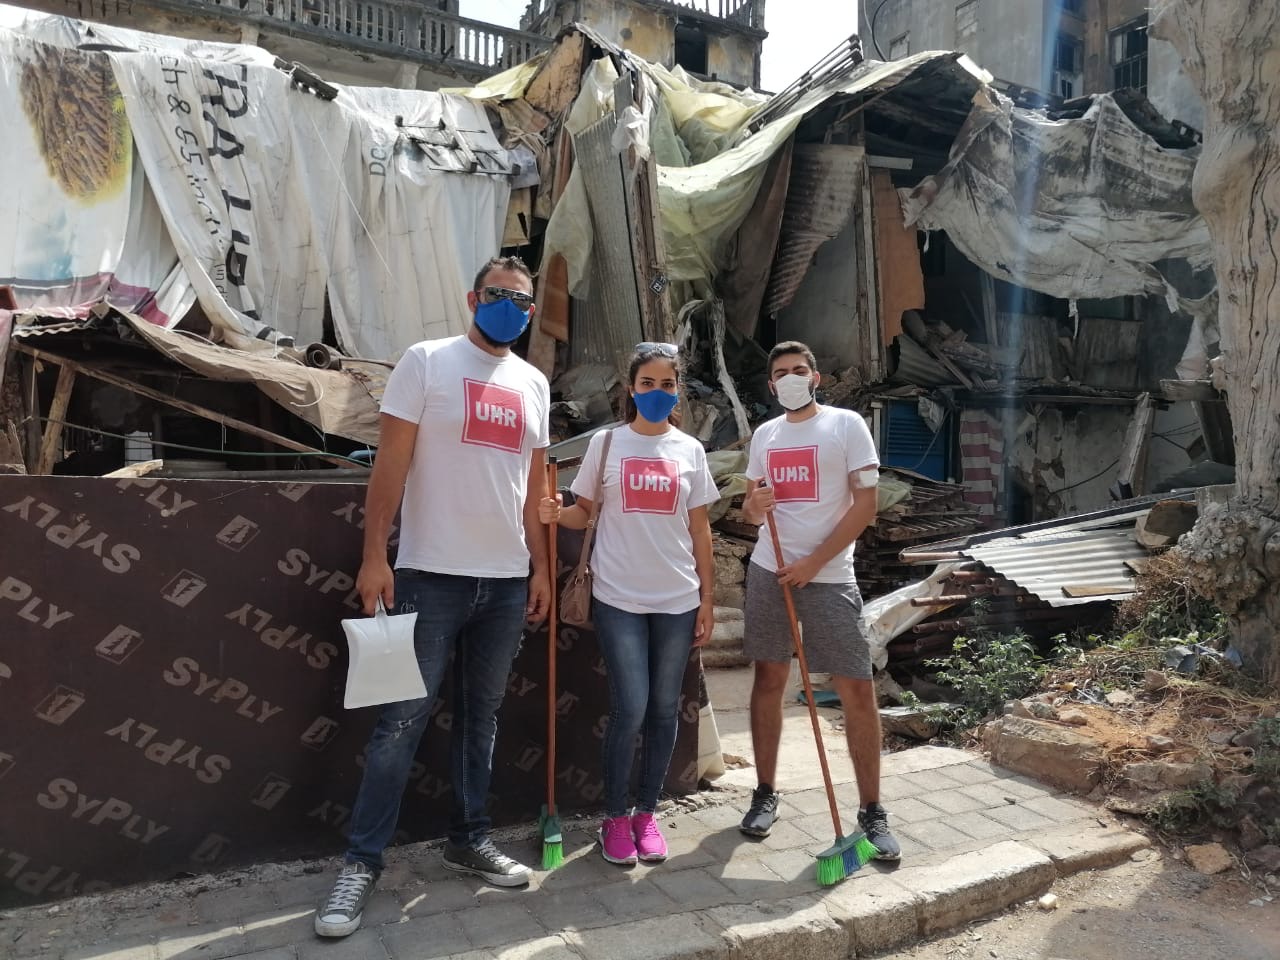 UMR volunteers on the ground in Beirut  to help the city clean up